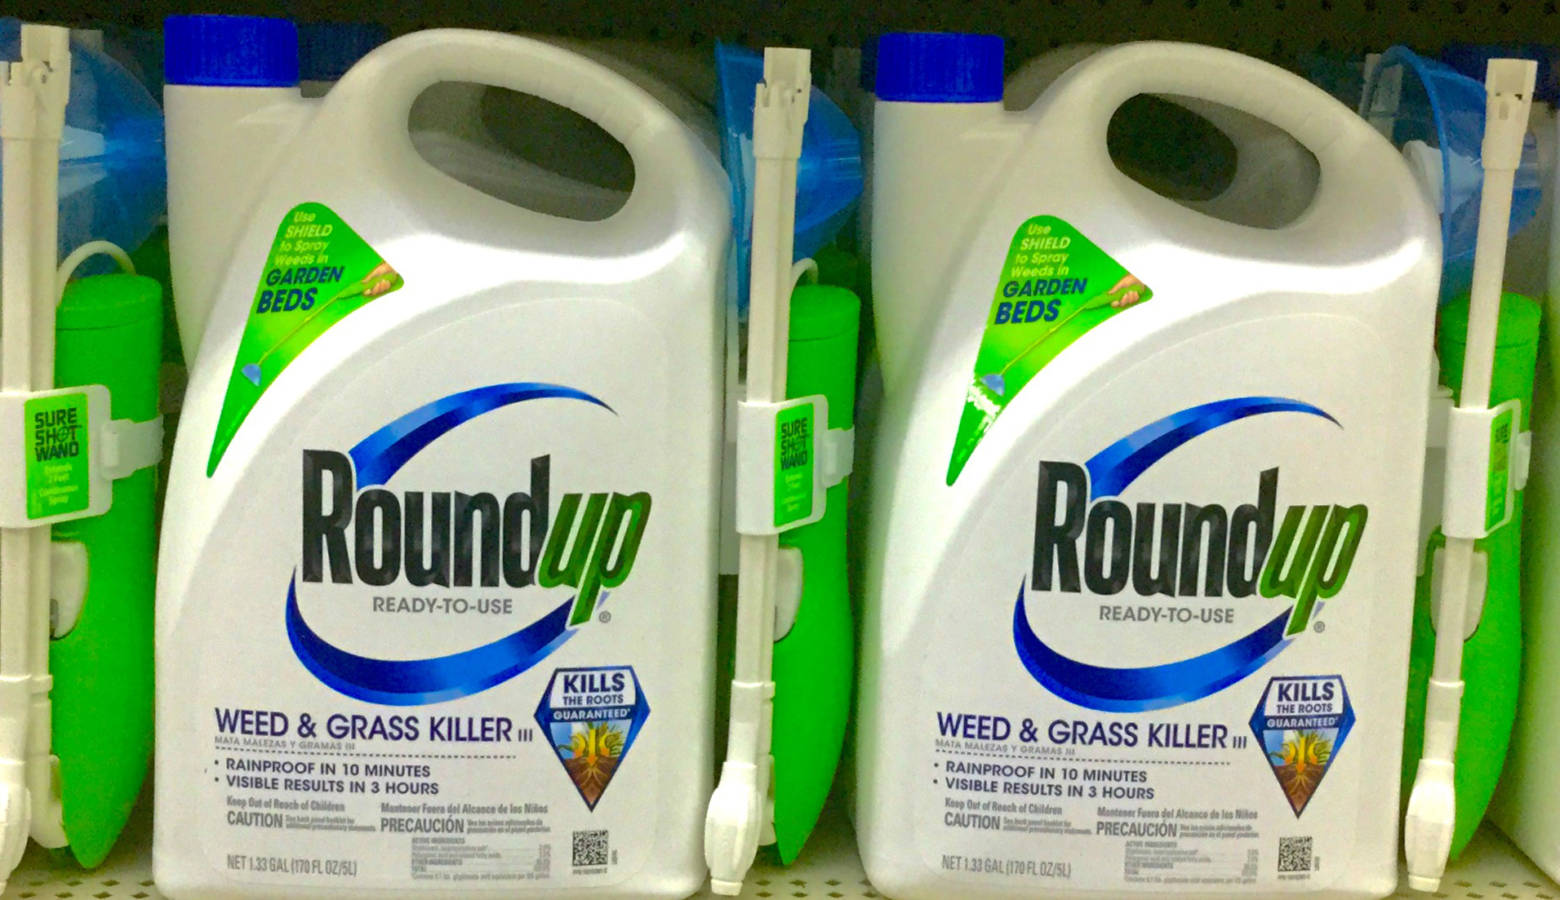 Roundup weed killer contains glyphosate (Mike Mozart, https://creativecommons.org/licenses/by/2.0/)